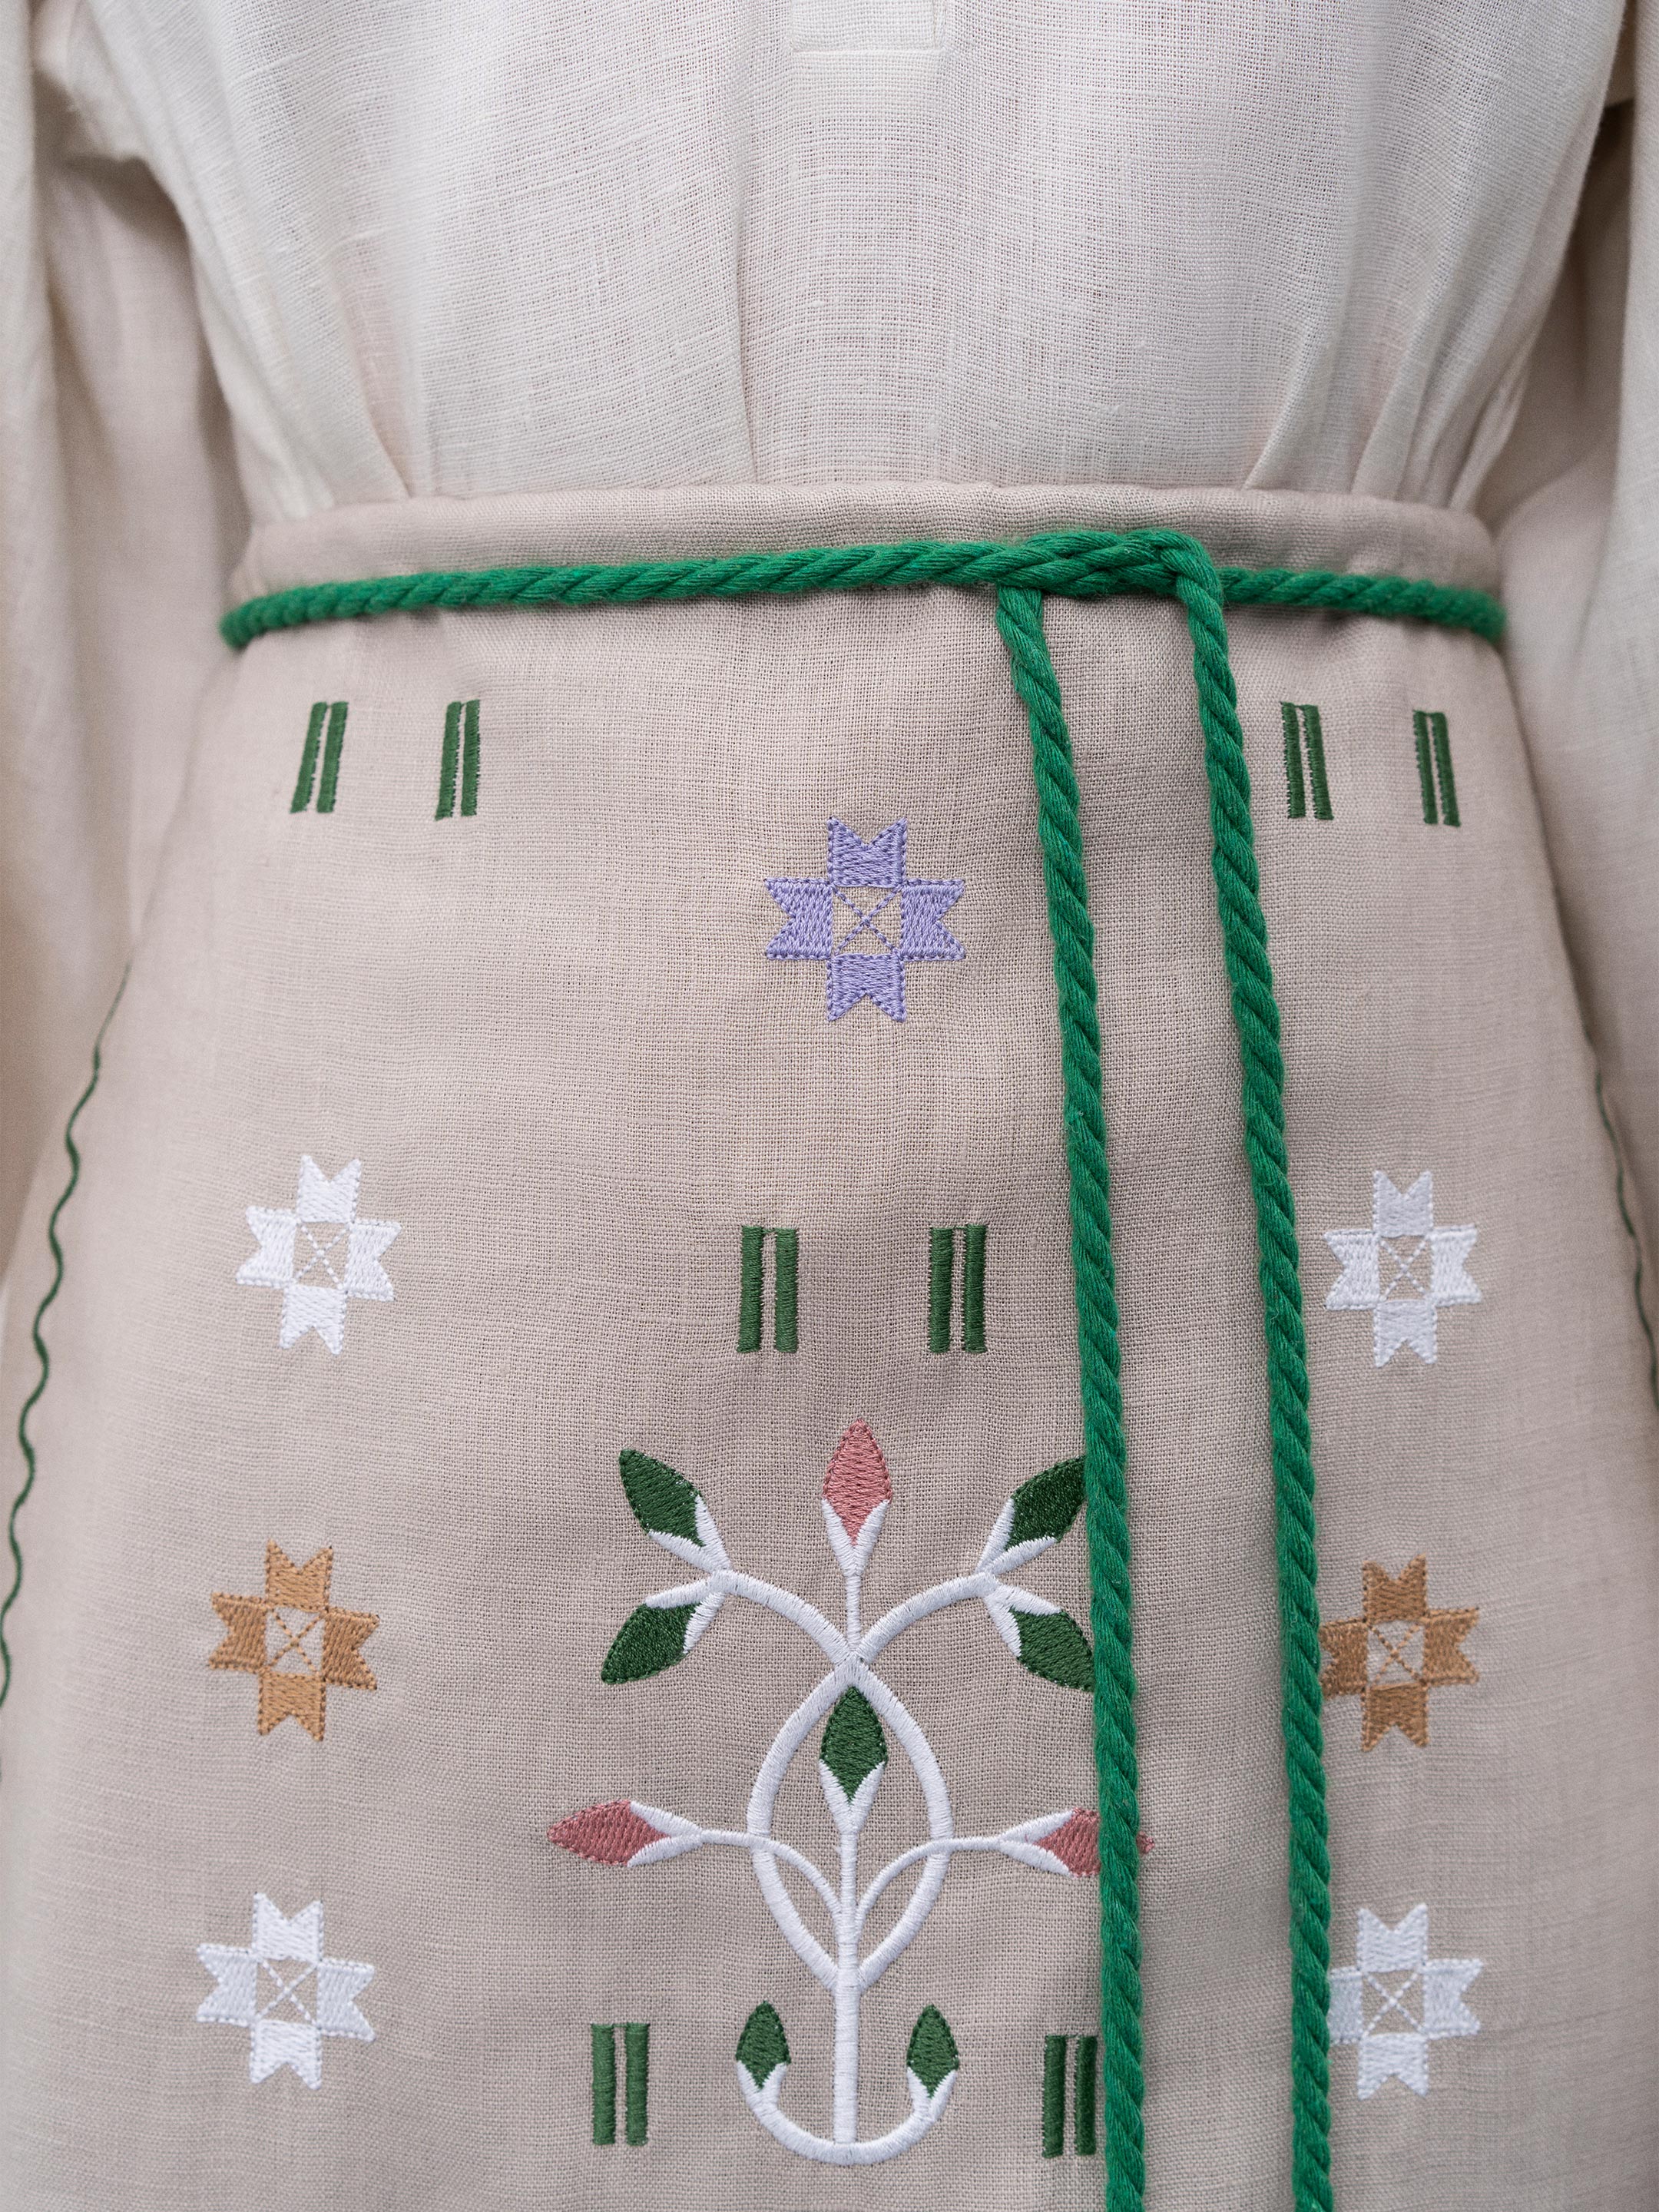 Embroidered linen apron with colored tassels Rozmay - photo 2